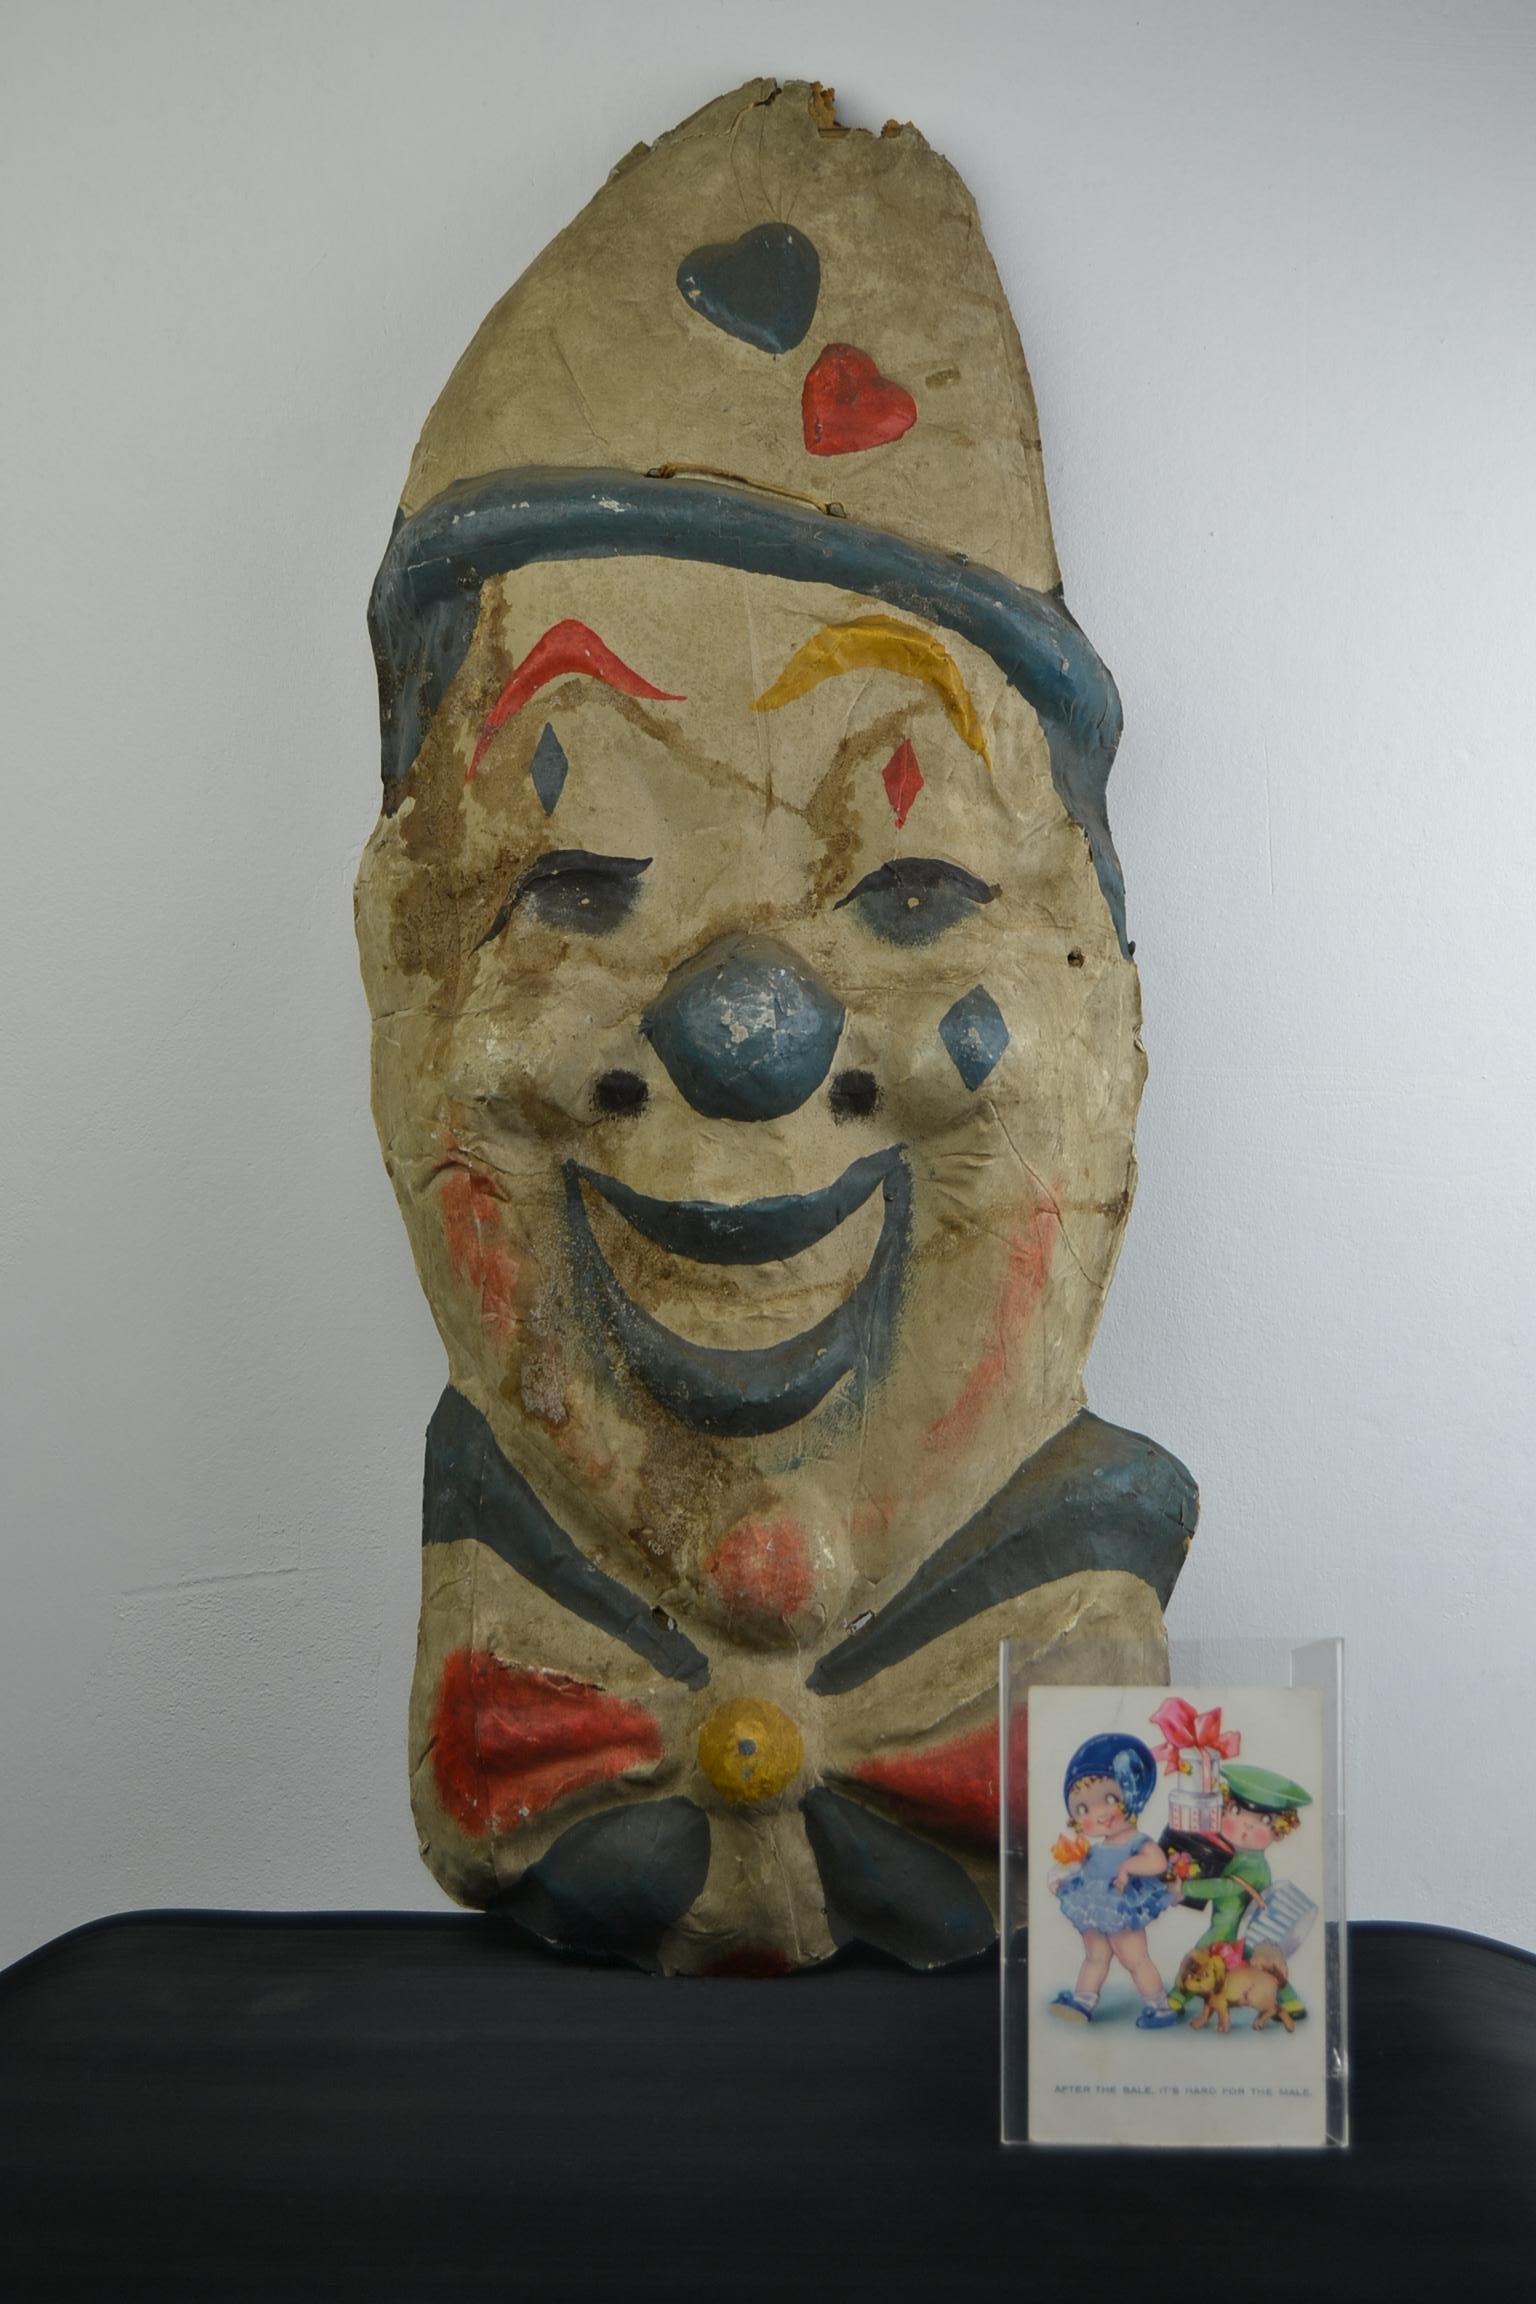 Smiling papier mâché - Paper Mâché circus clown head, circa 1930s.
This large wall decoration, theme circus - clown, happy clown
has details in the colors blue, red and yellow.
Due the age, he has a patina and traces of use like on the hat,
but